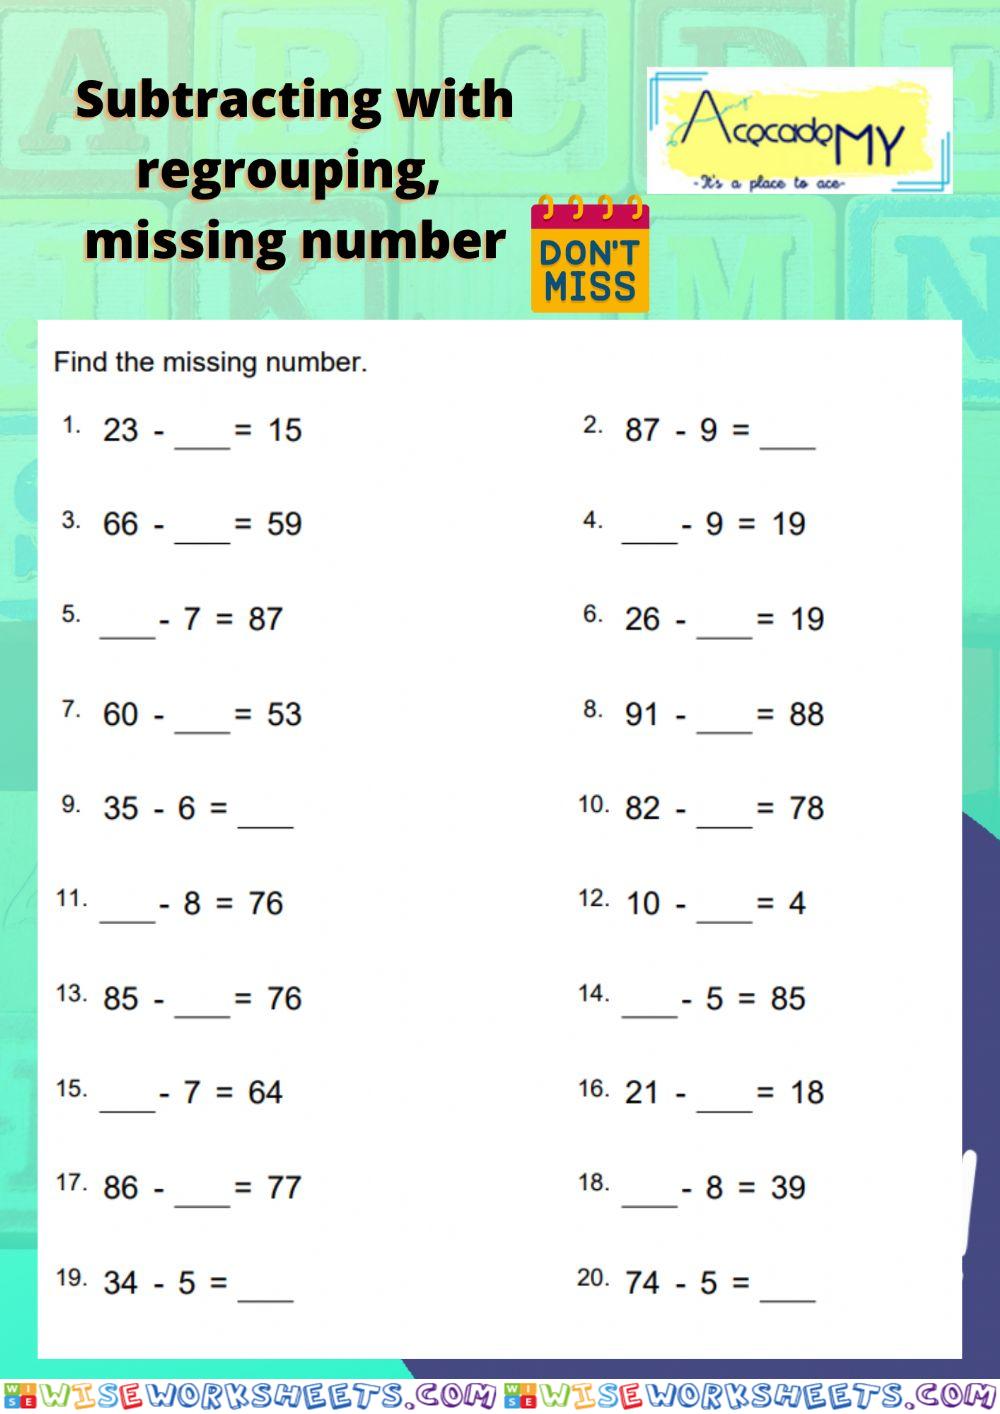 Subtracting with Regrouping, Missing Numbers